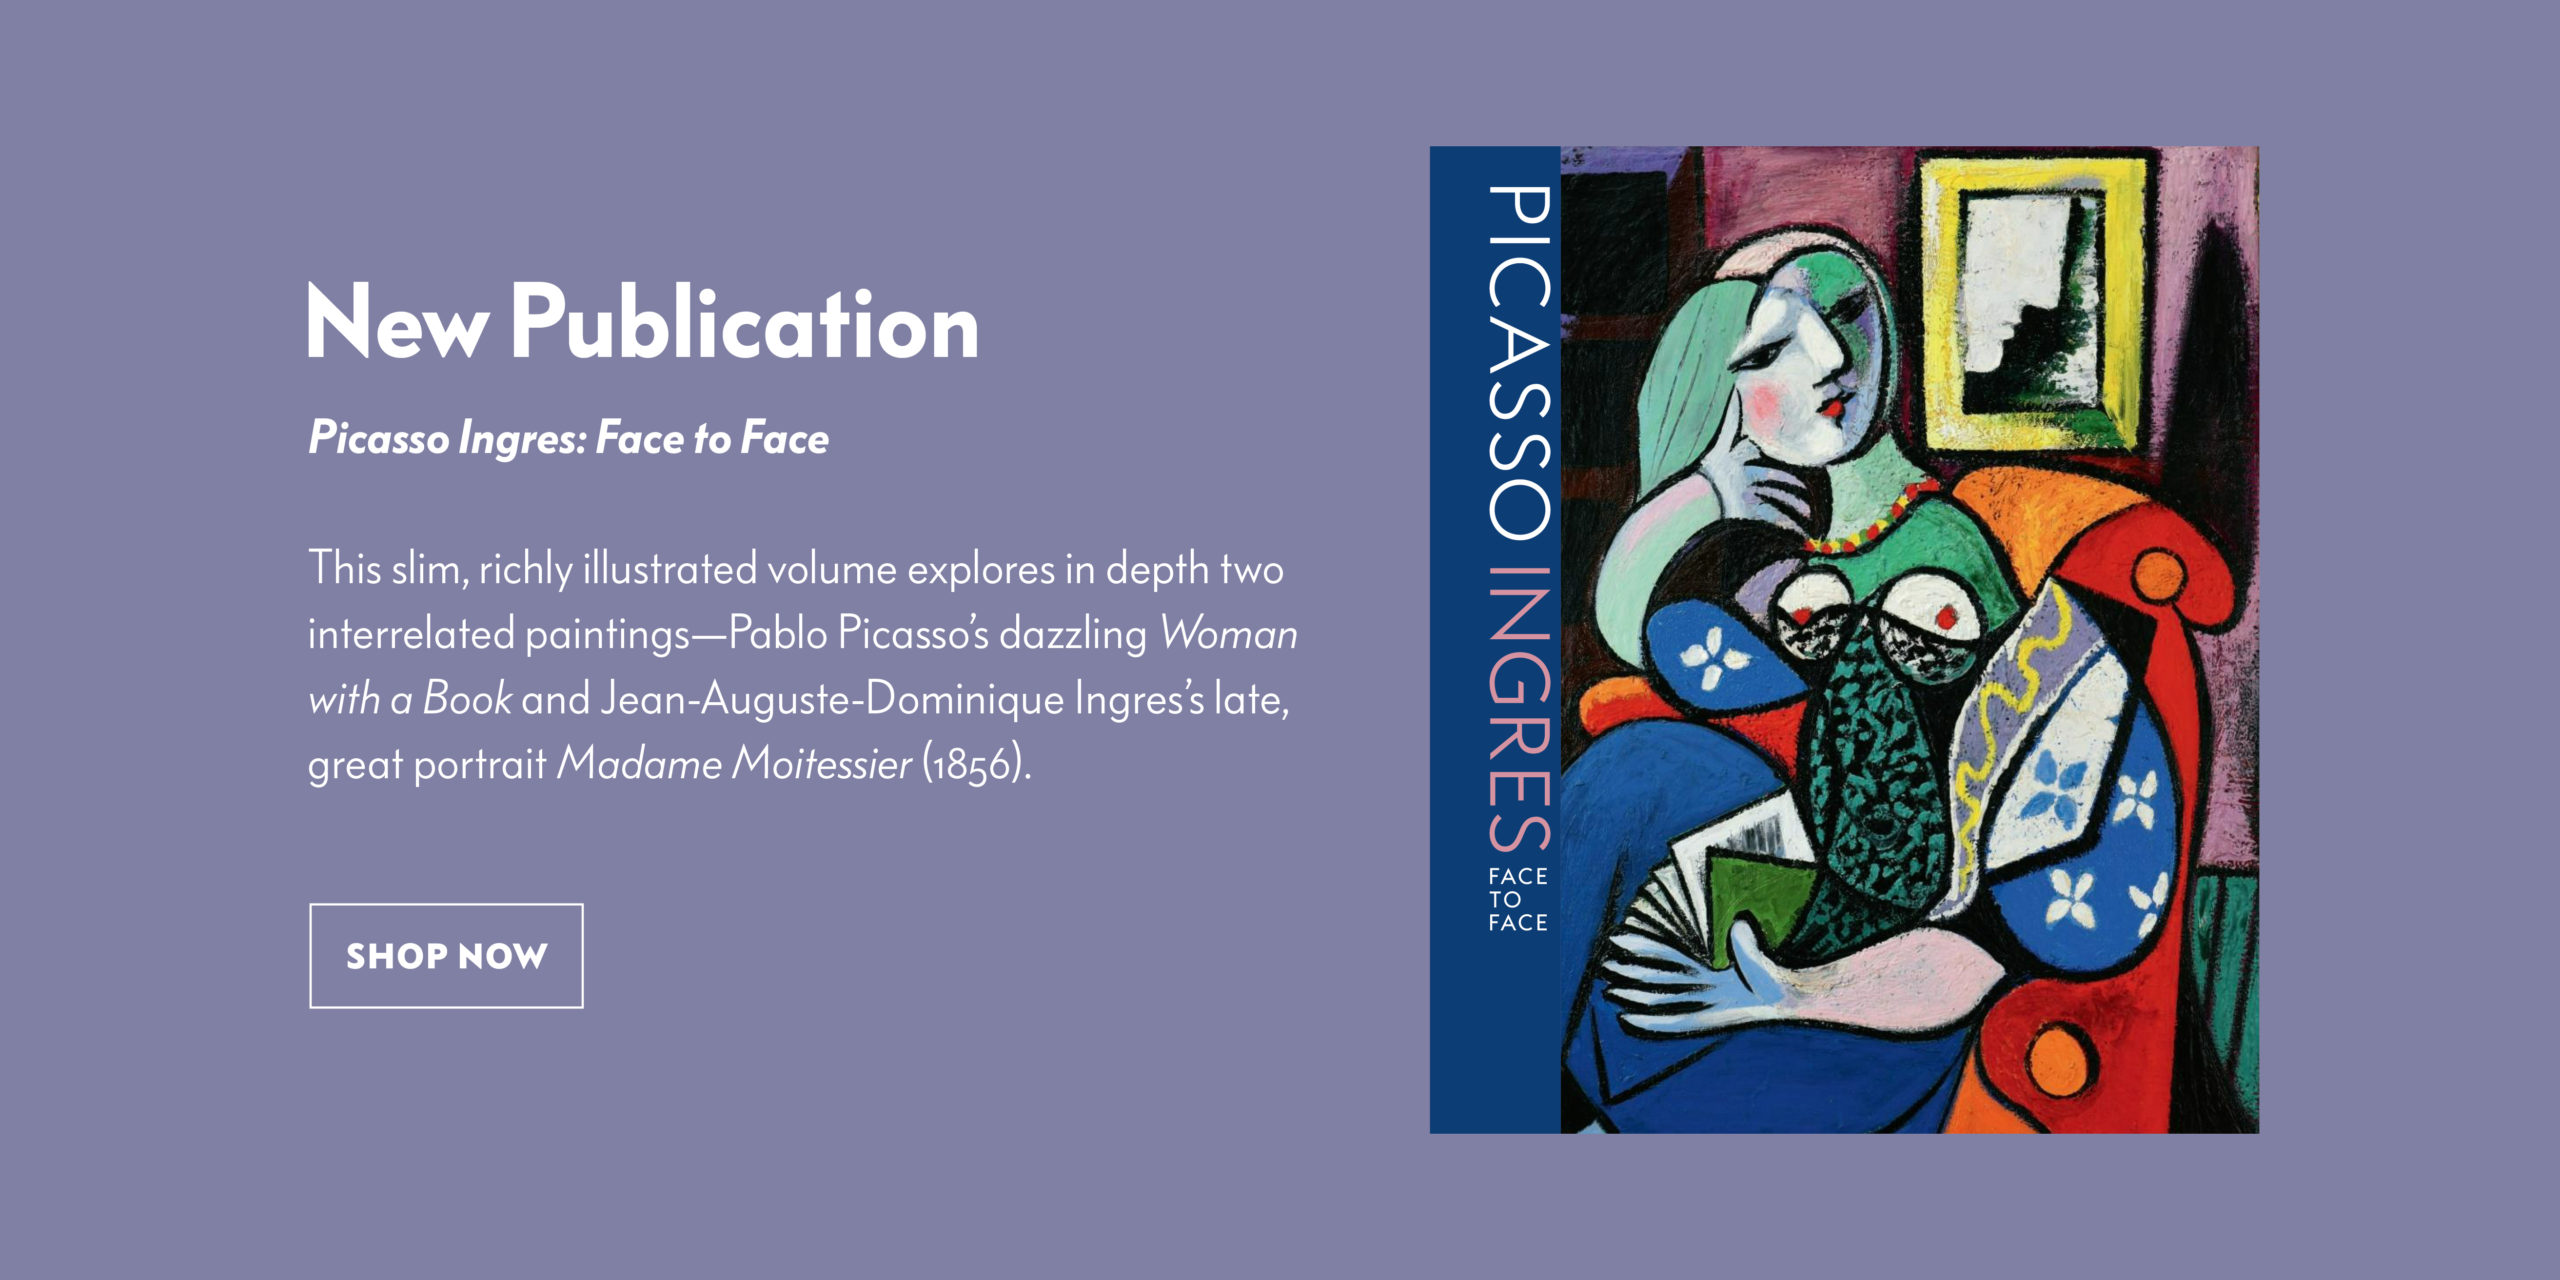 Picasso Ingres Face to Face publication